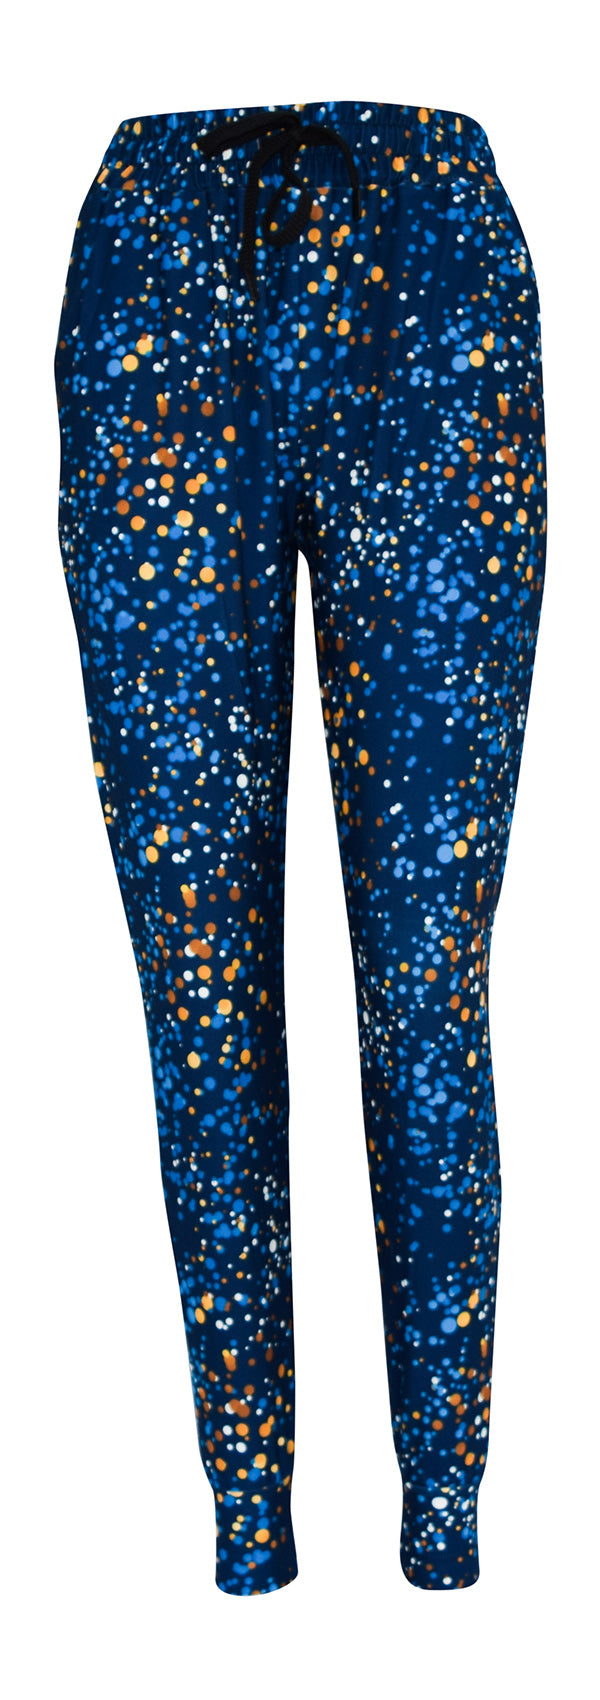 Space Galaxy Lejoggers-Joggers